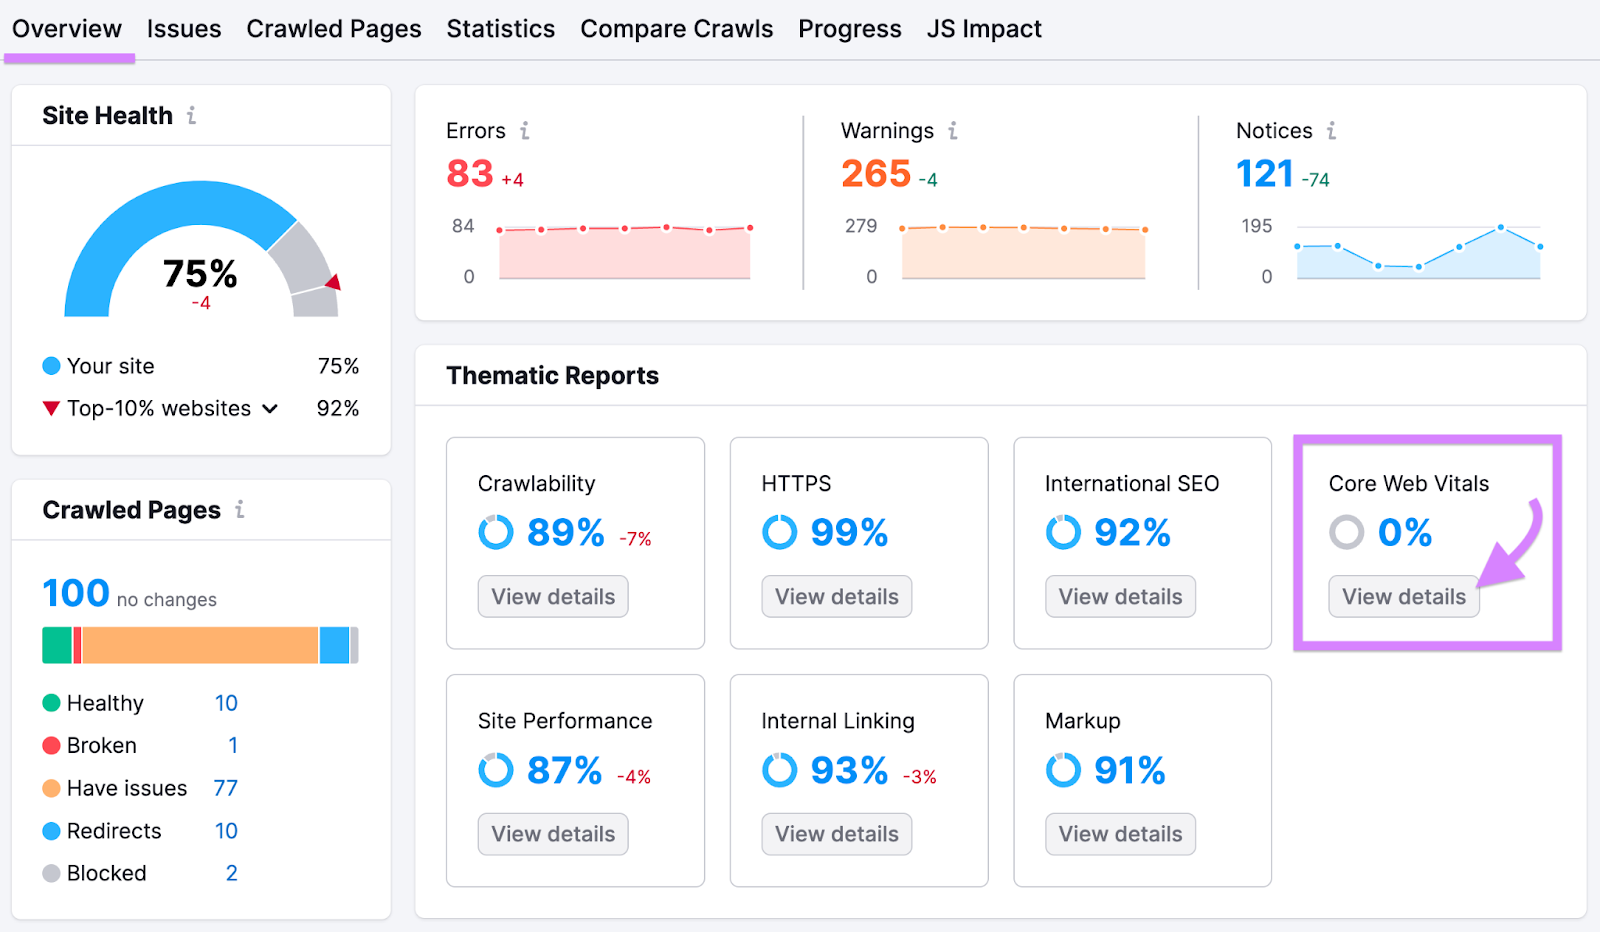 "Core Web Vitals" widget highlighted successful  Site Audit's overview dashboard